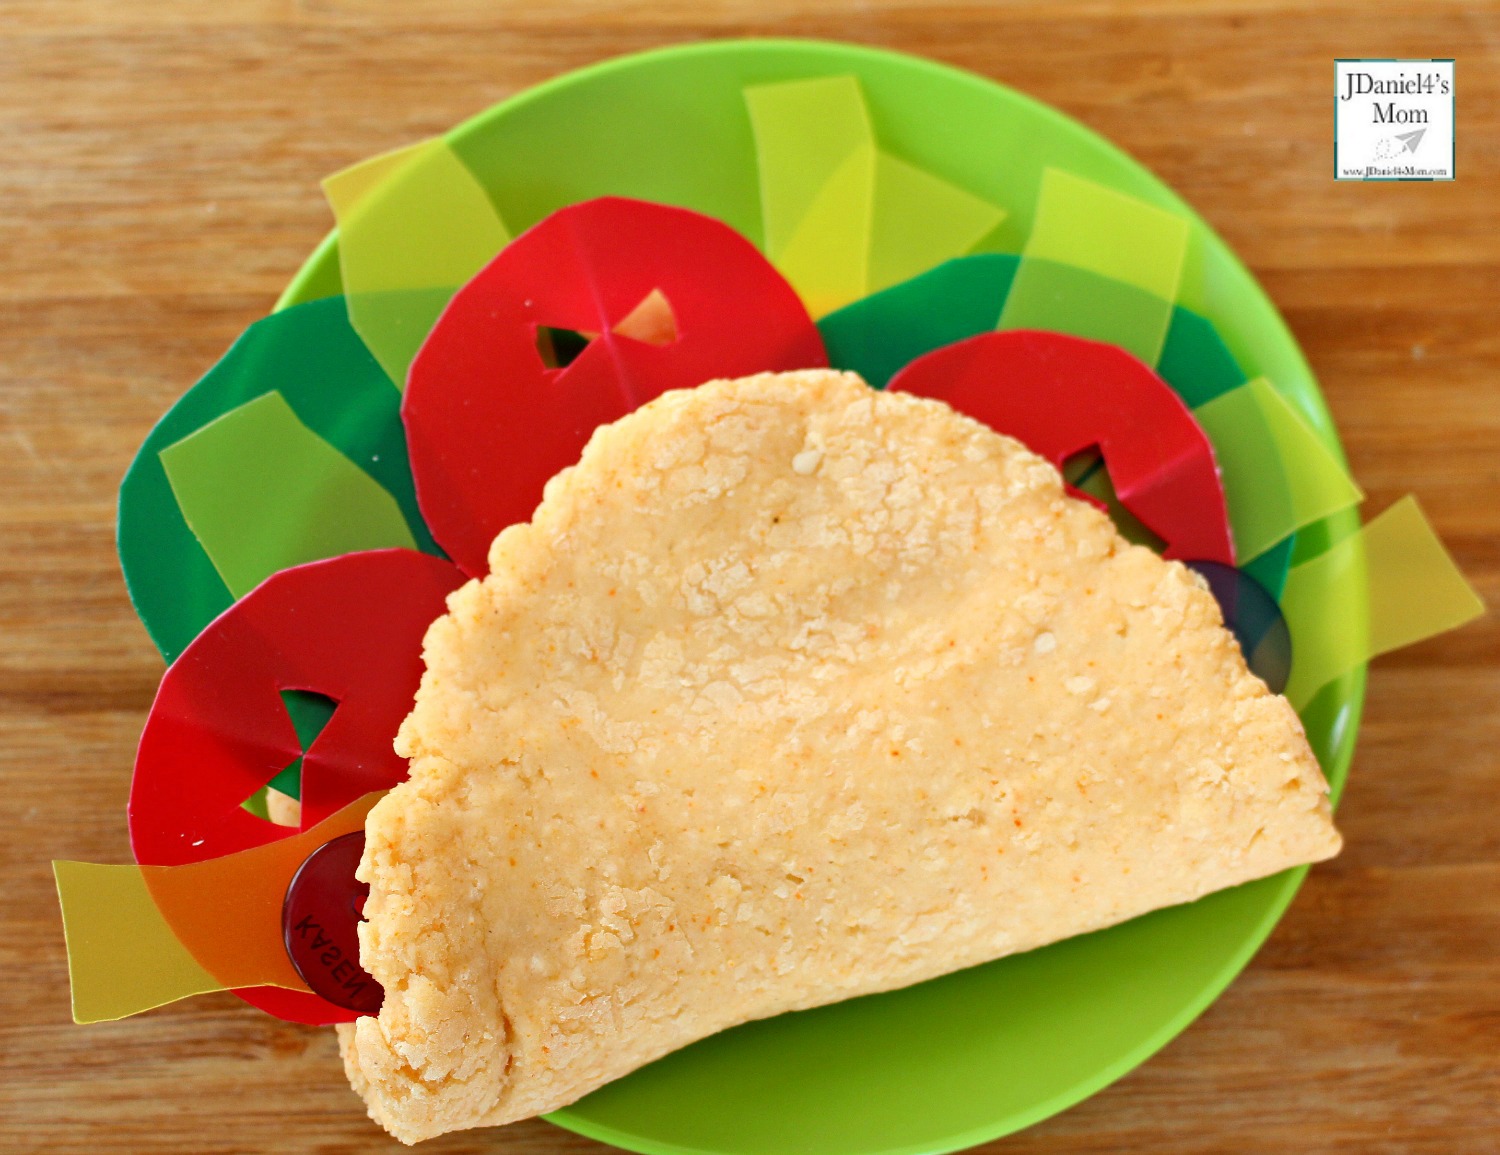 Dragons Love Tacos Themed Playdough Recipe and Activity - Children at home and students at school will have fun building dinosaurs sized tacos with taco scented playdough. This playdough recipe is so easy to make. This what a finished taco looks like.